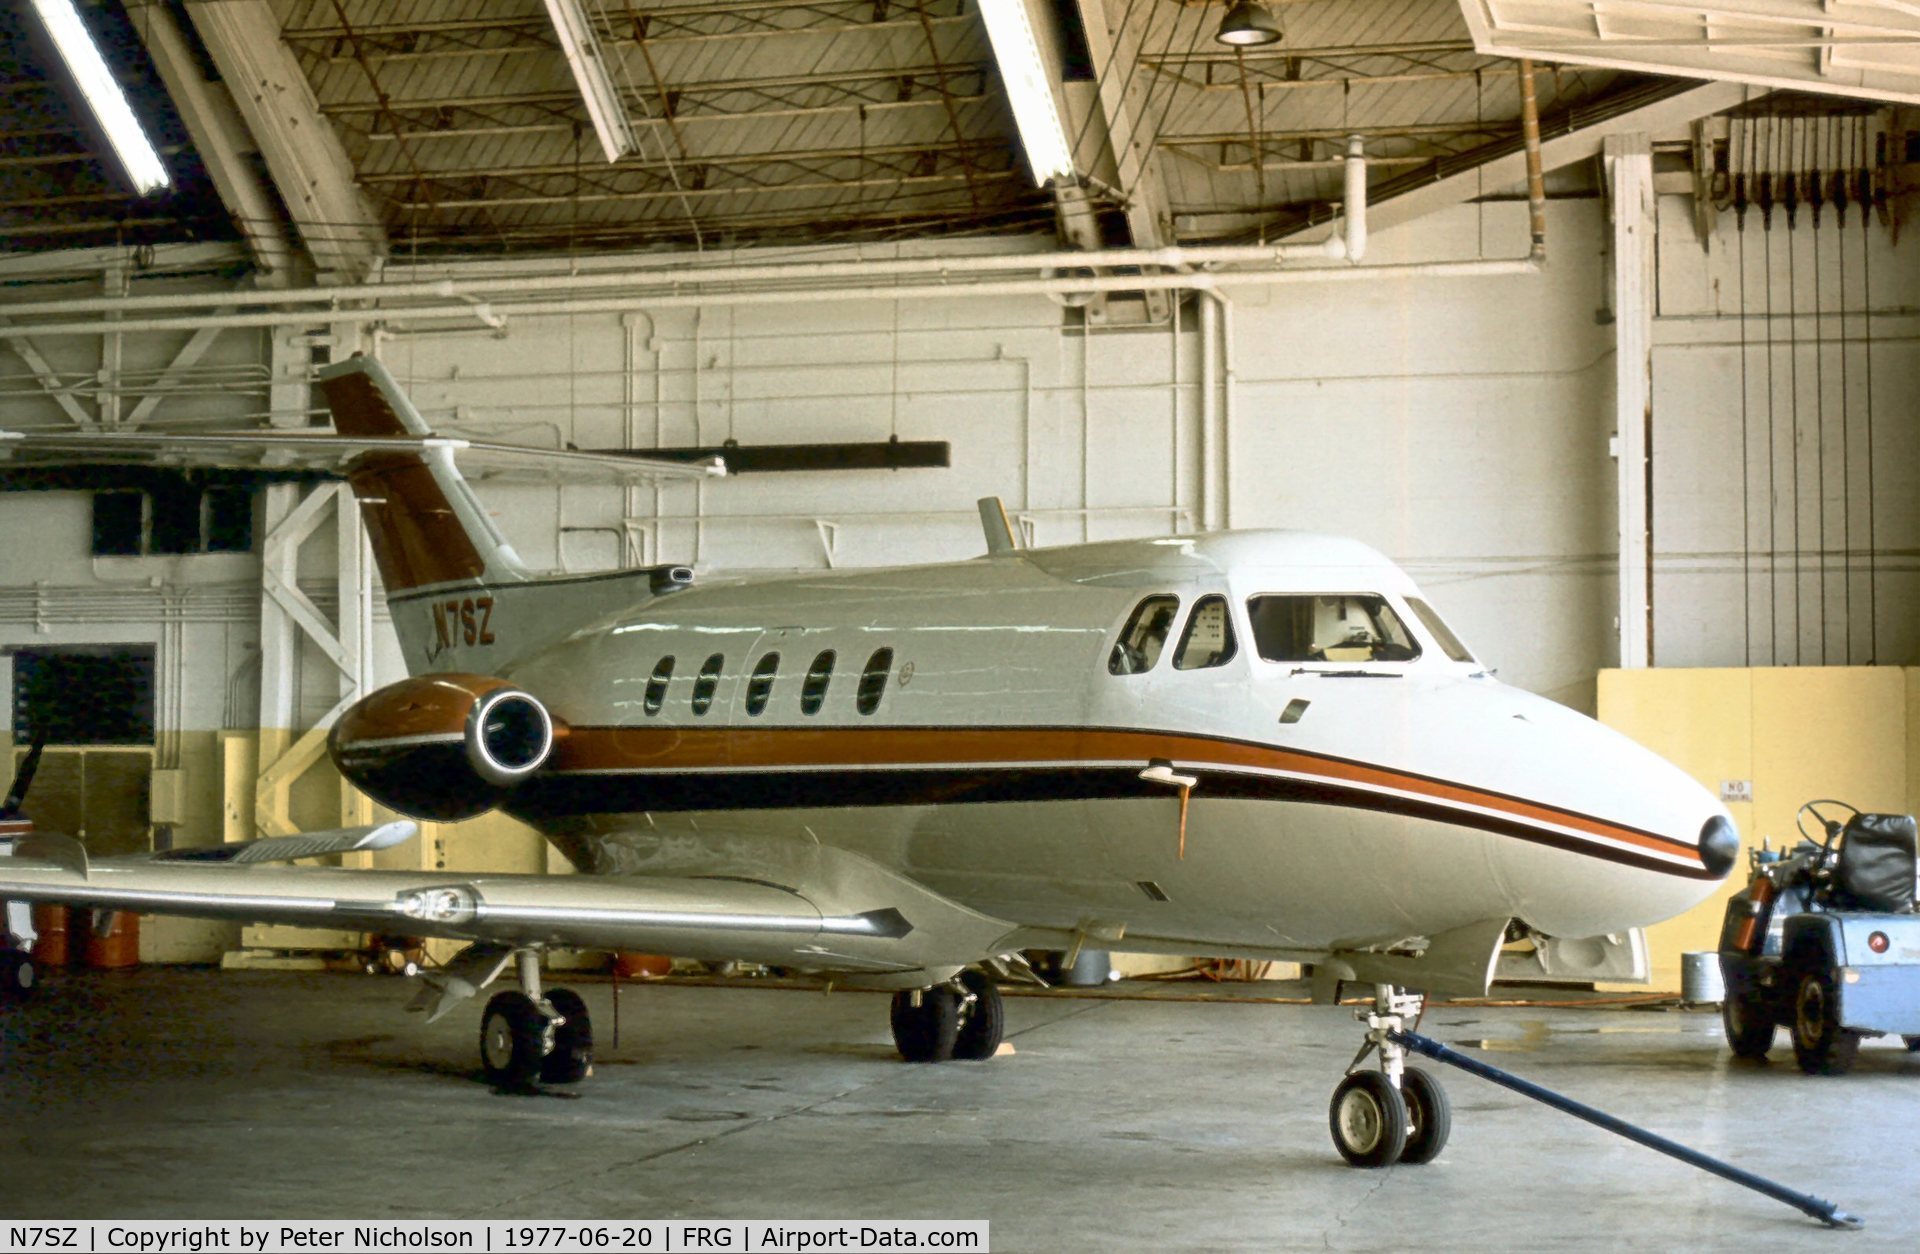 N7SZ, 1966 Hawker Siddeley DH.125-1A/522 C/N 25100, DH.125 Series 1A/522 hangered at Republic in the Summer of 1977.